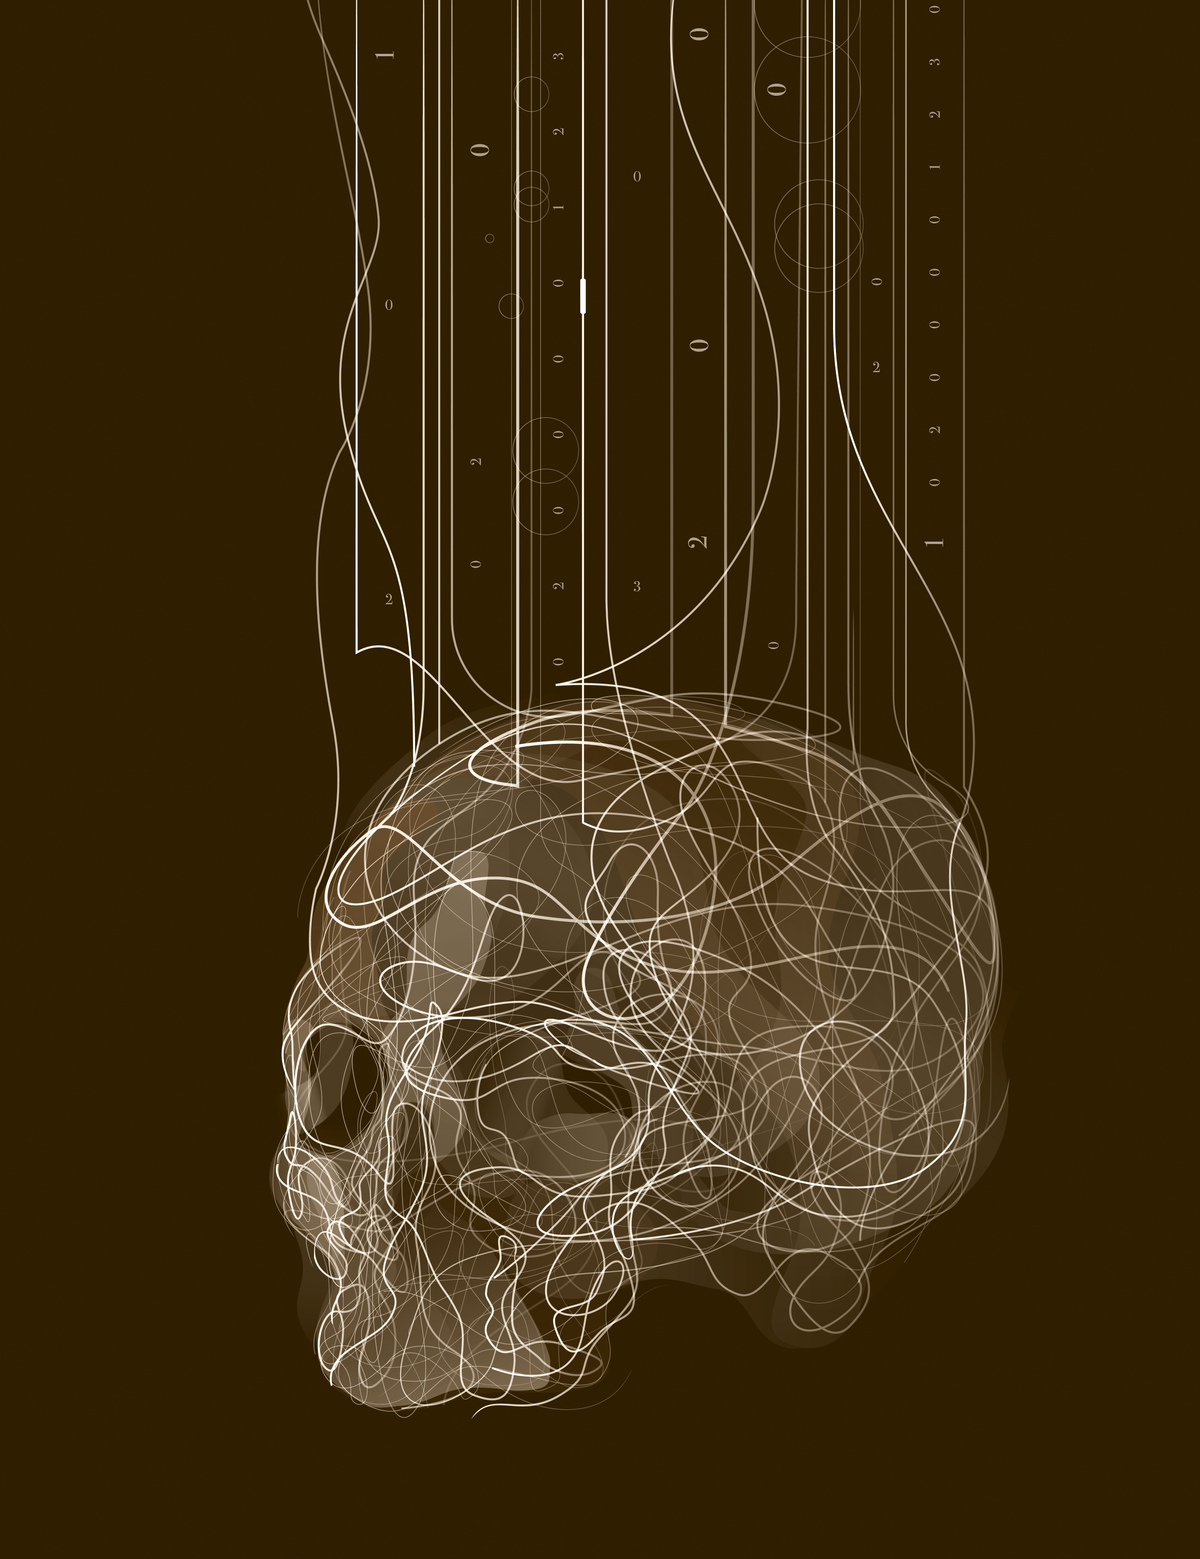 An illustration of a skull made up of squiggly lines.  